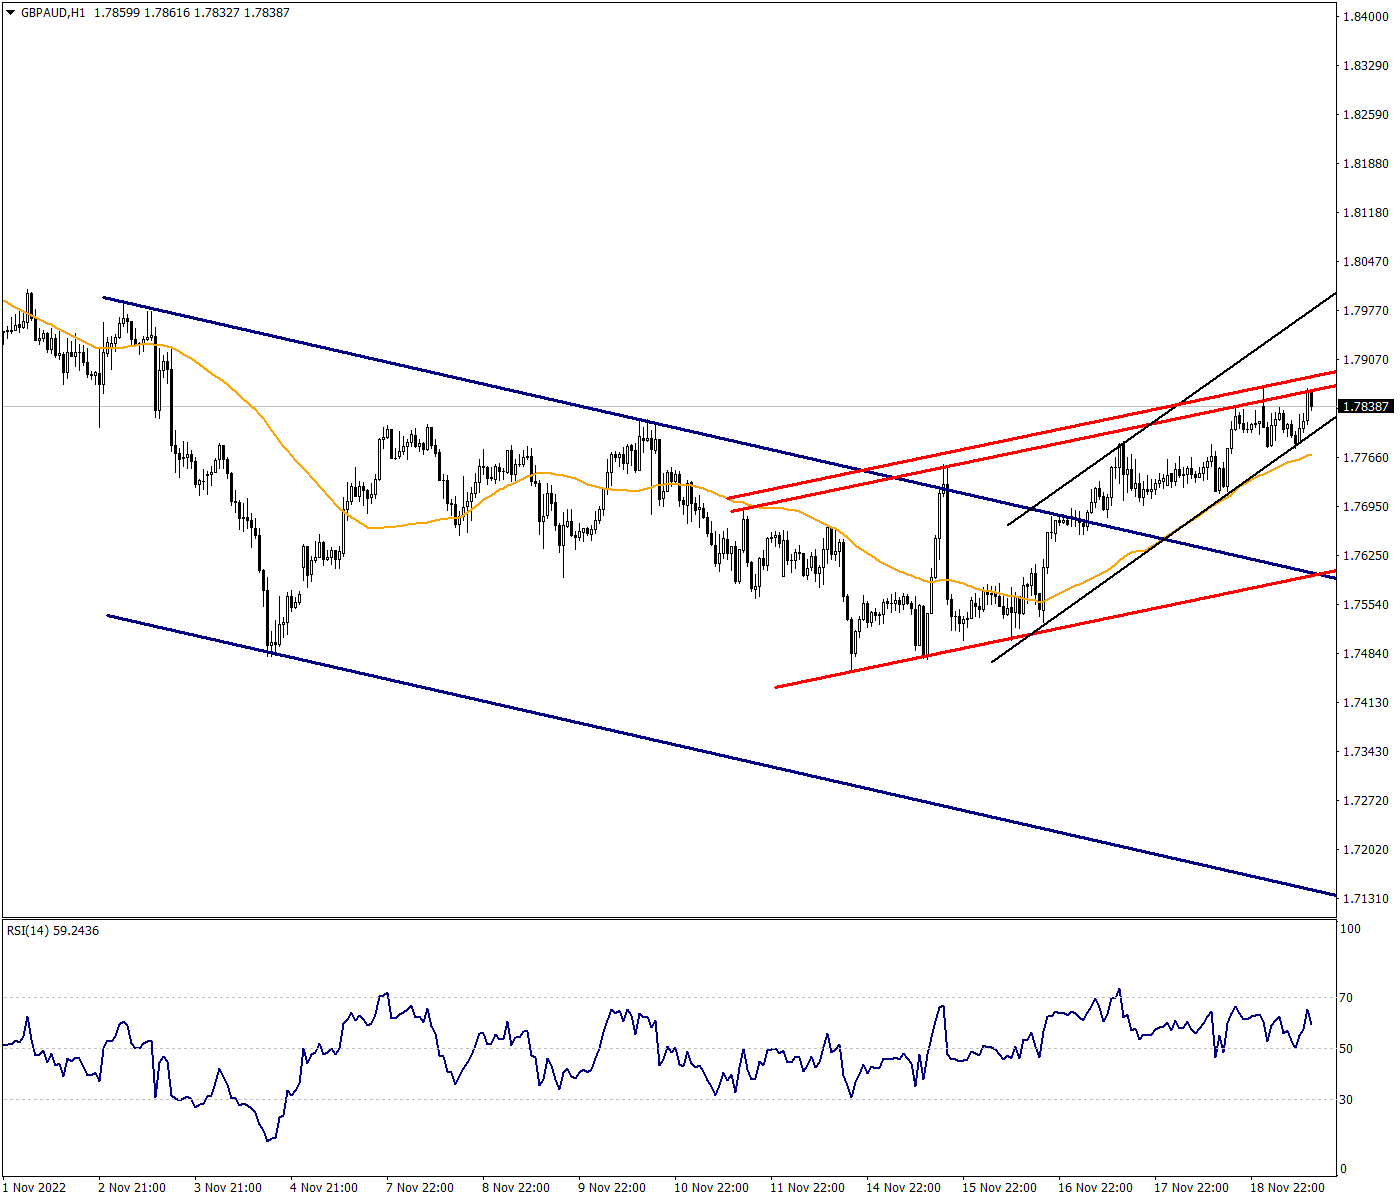 GBPAUD Continues to Defend Rising Channel